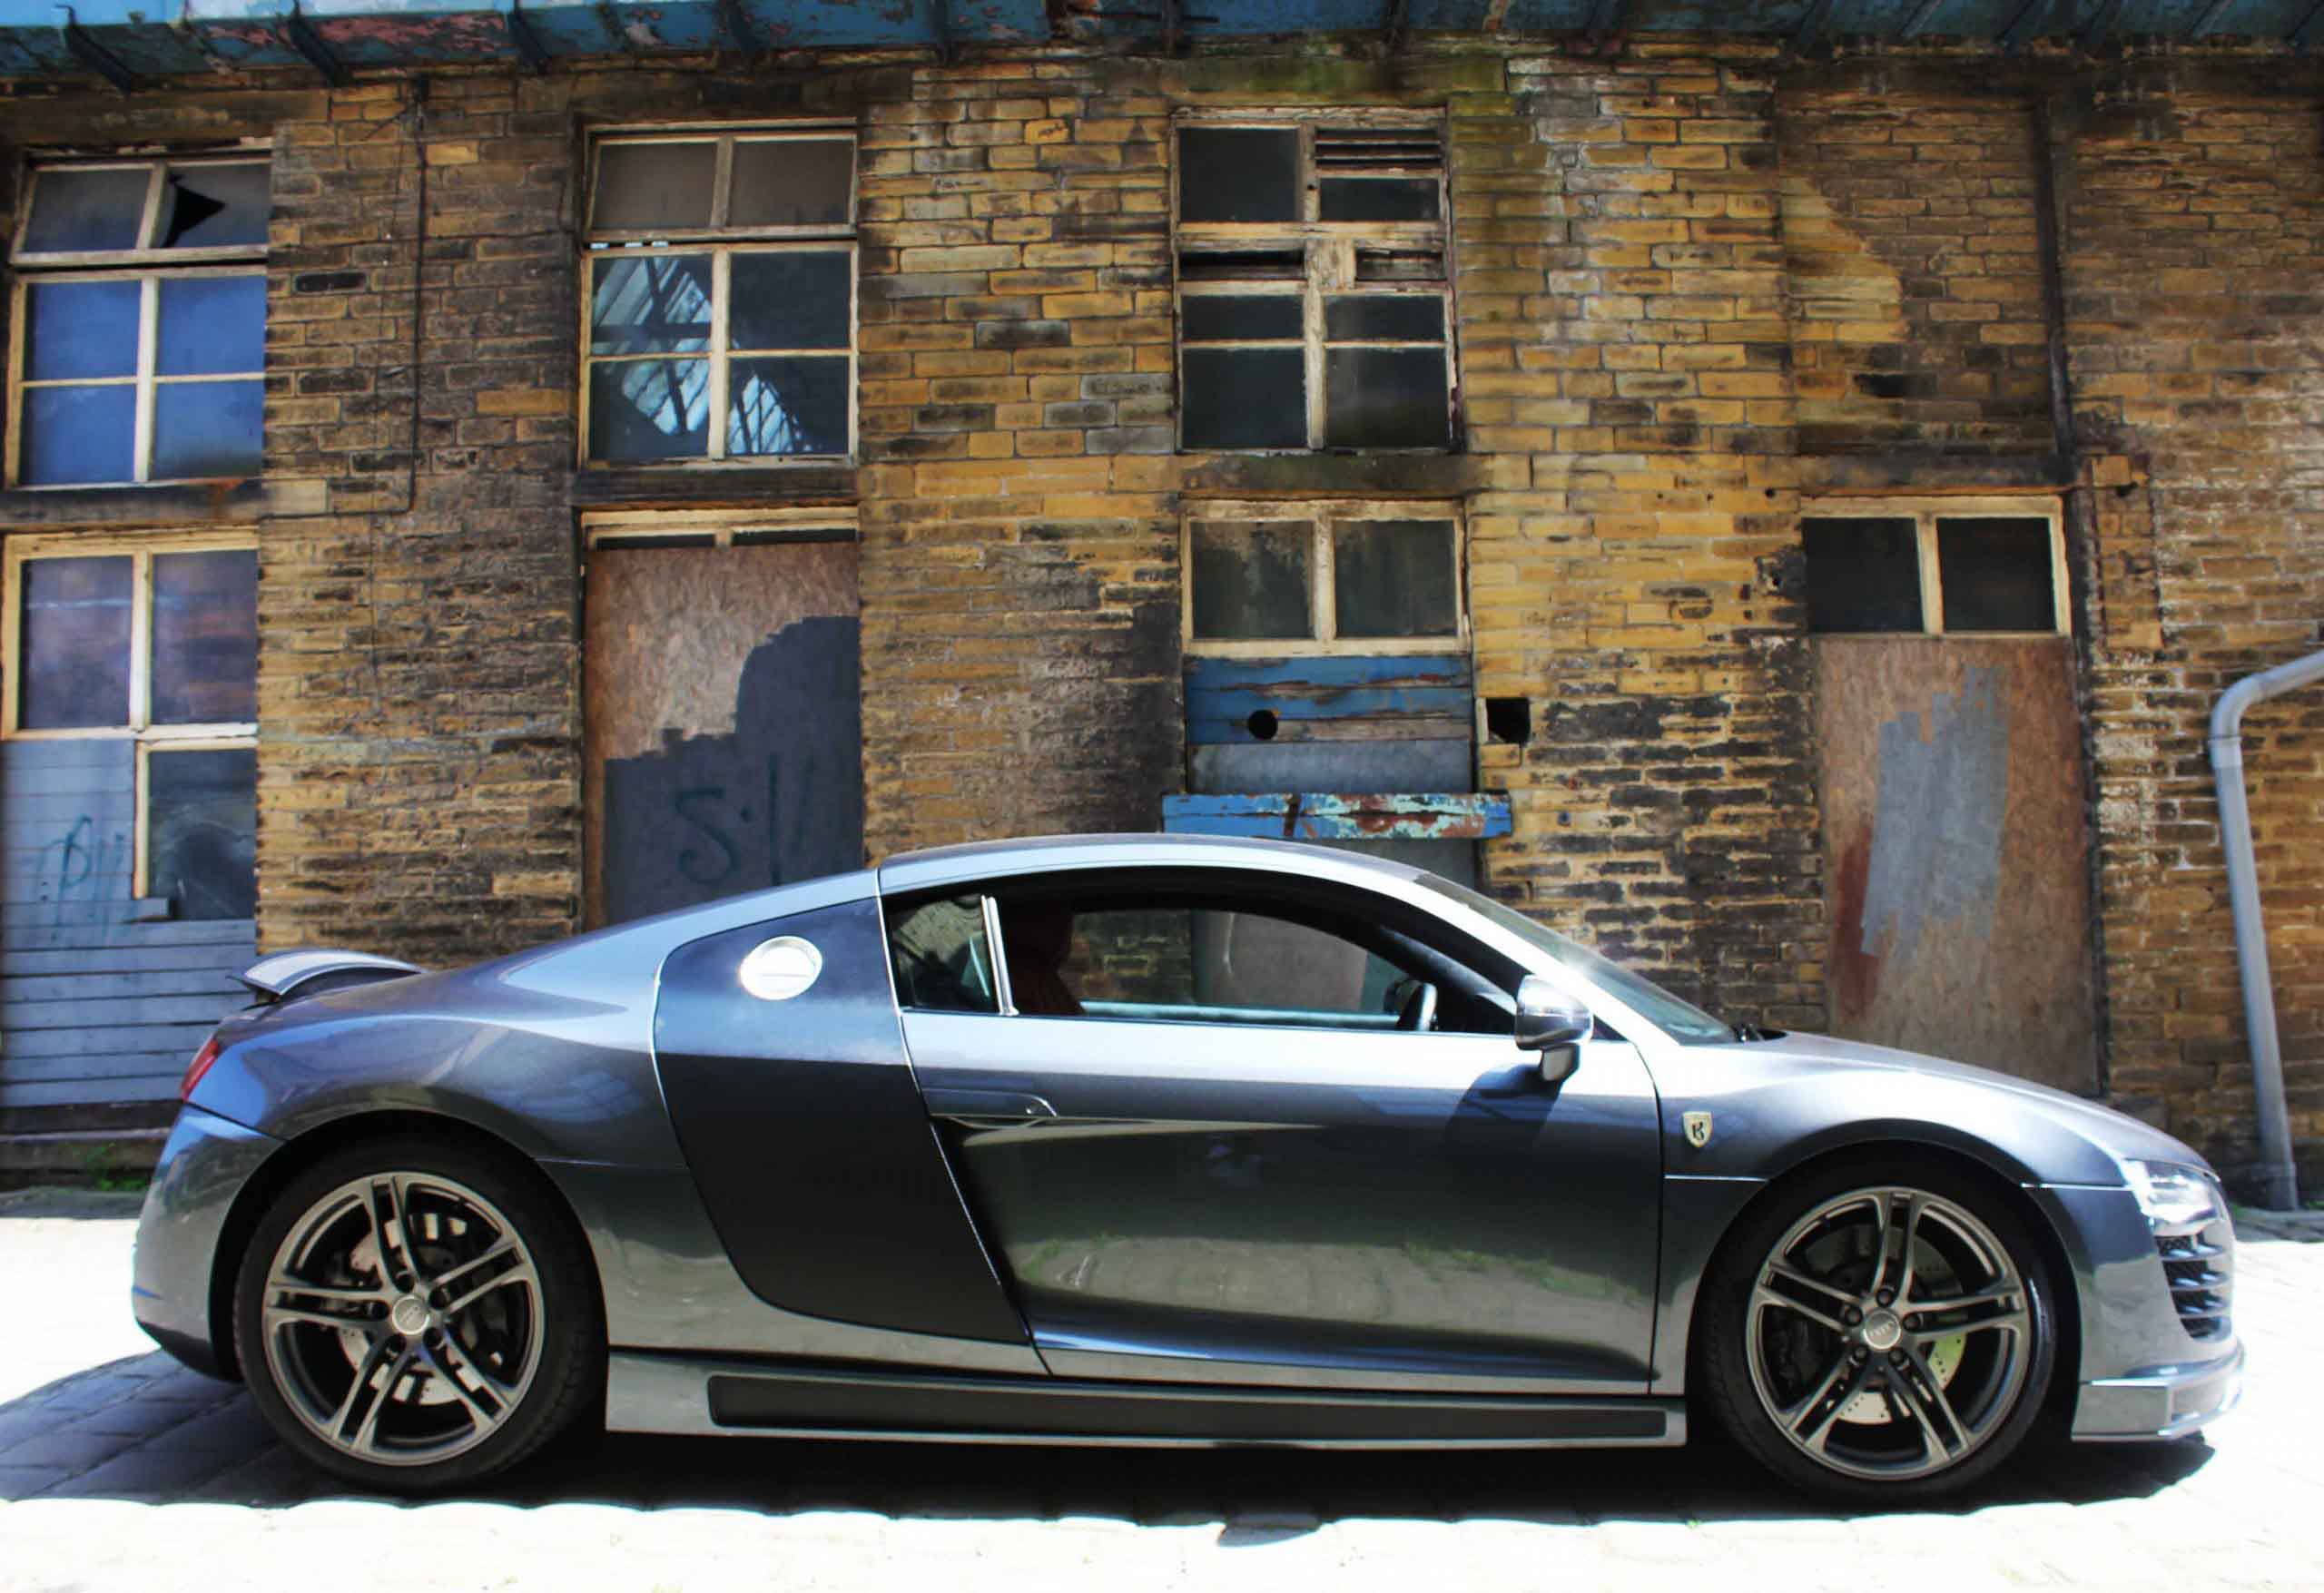 Check our price and buy Barugzai body kit for Audi R8 42!